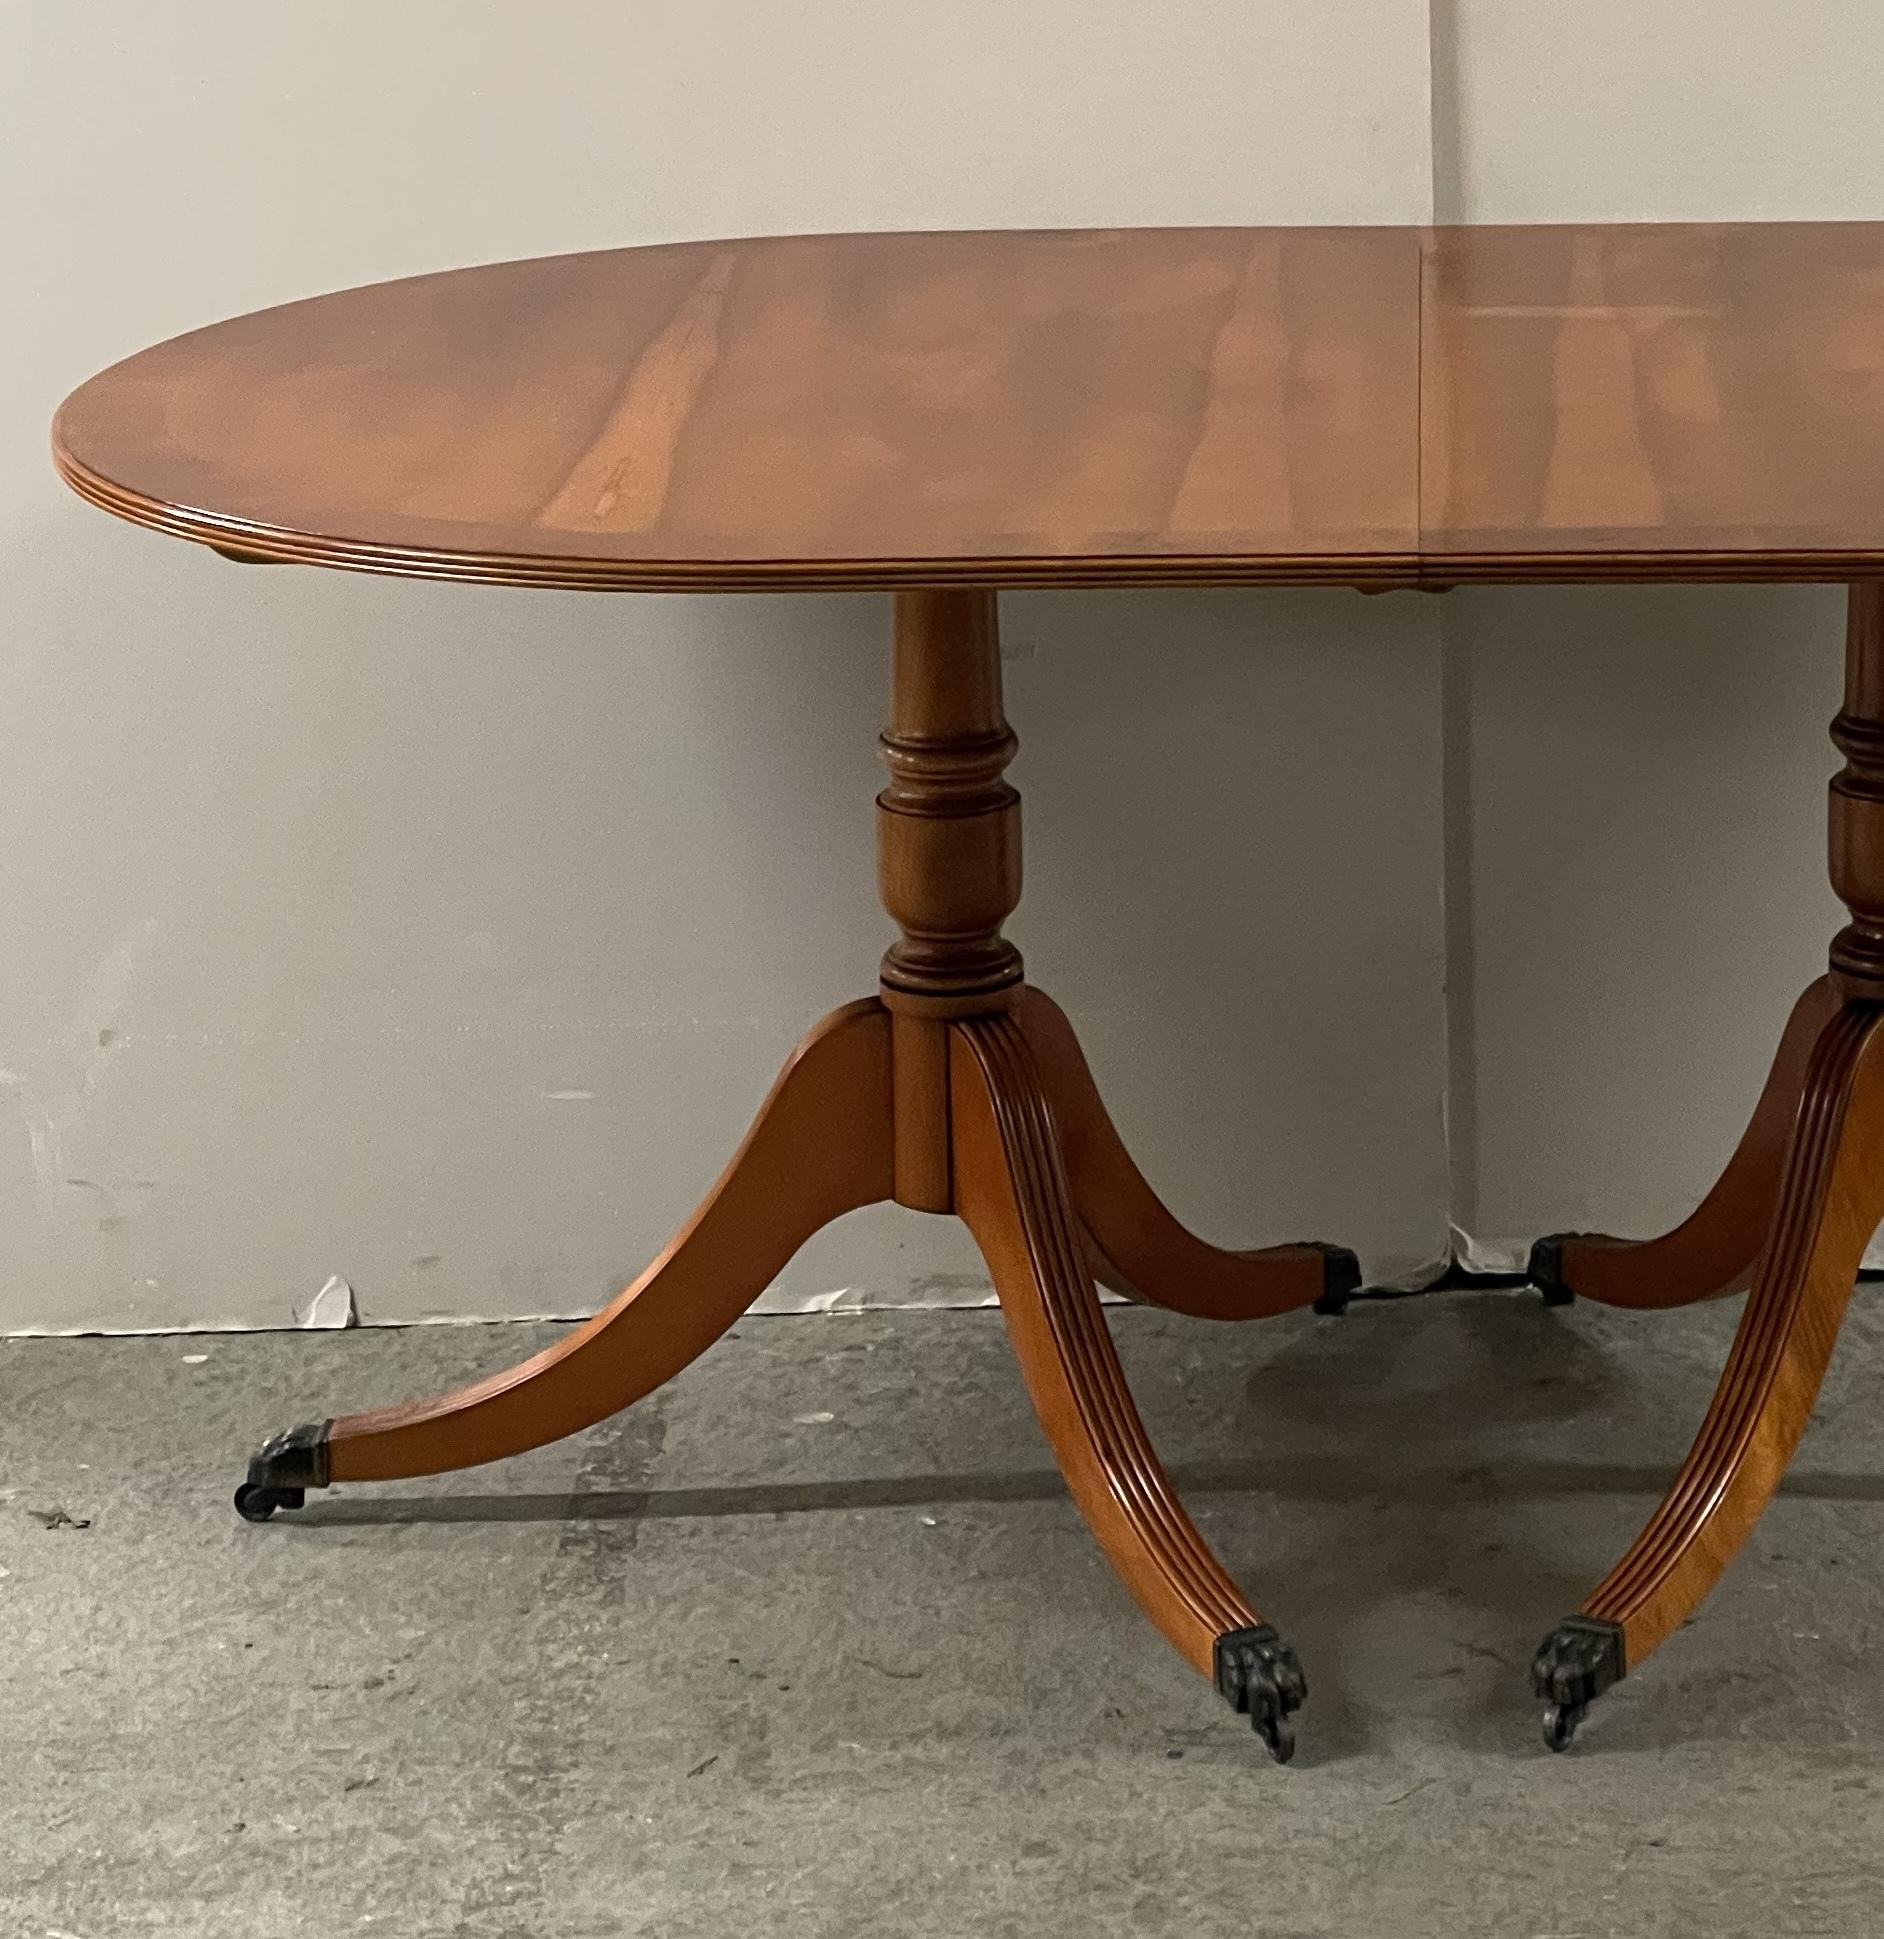 English Vintage Yew Wood Twin Pedestal Extending Dining Table Seats 6-8 People For Sale